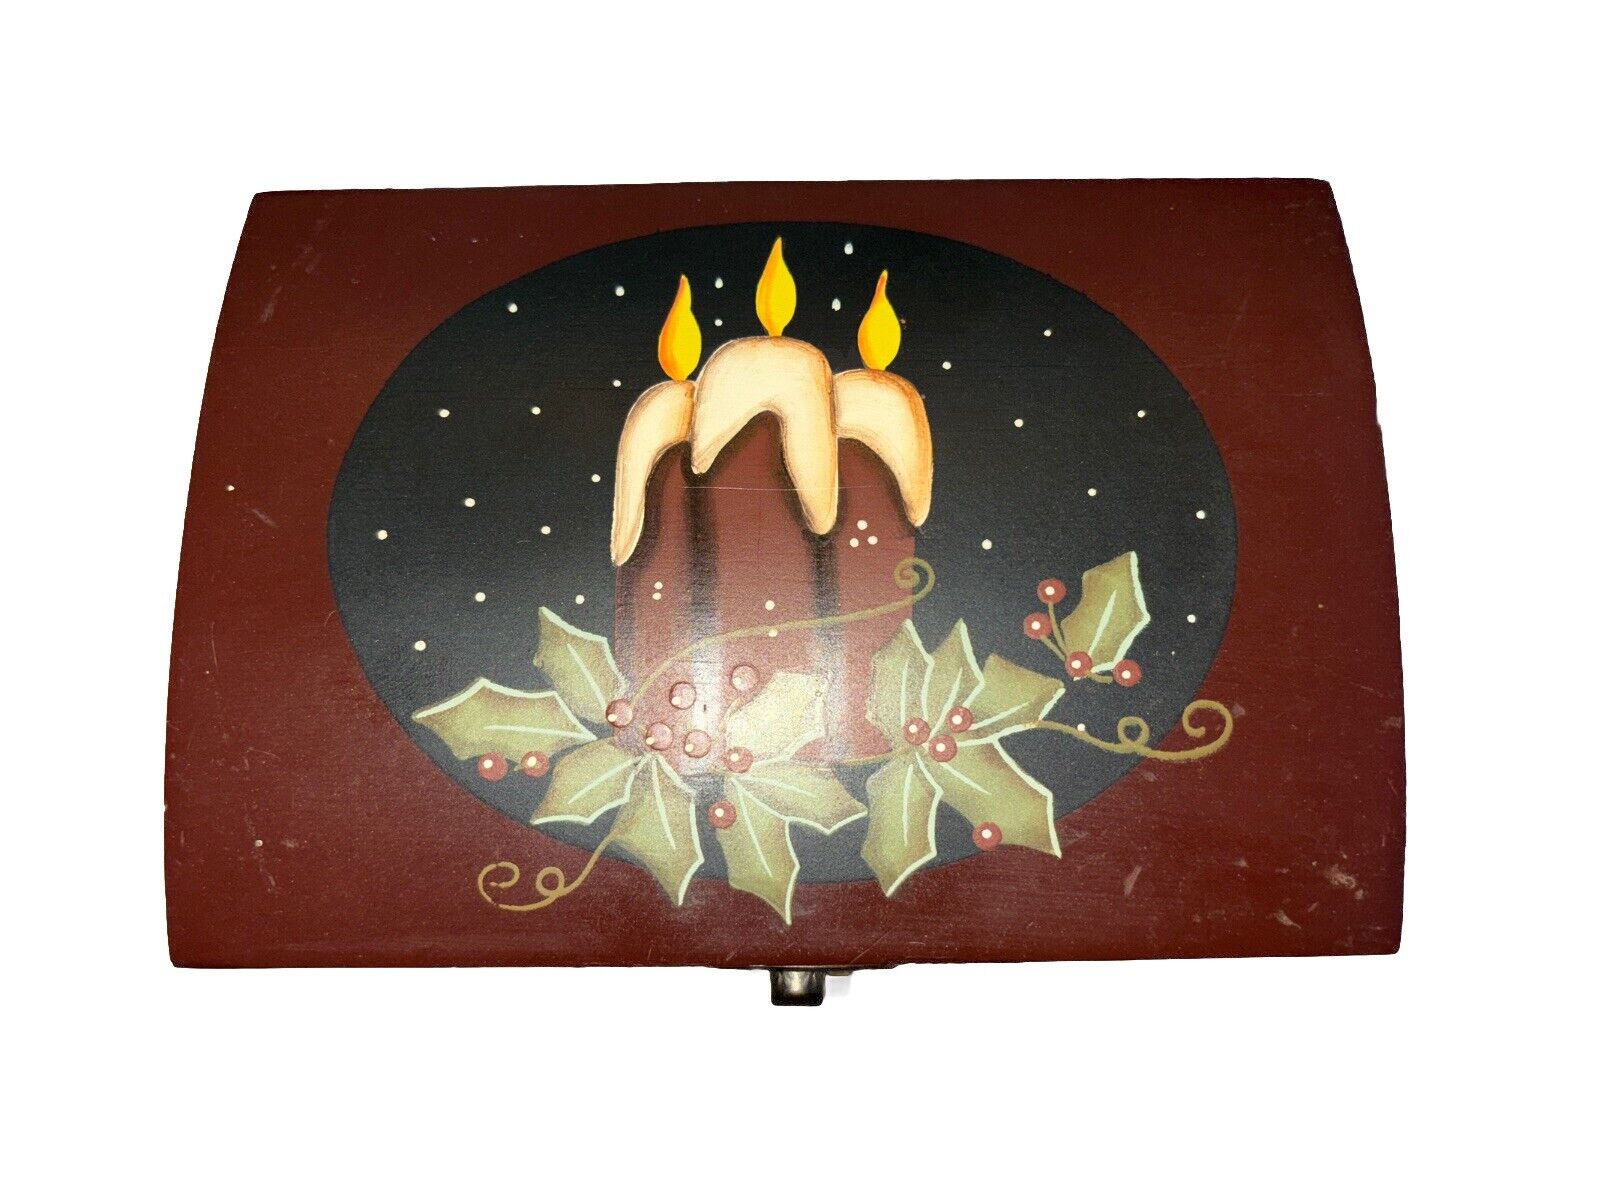 Crazy Mountain Wooden Candle Box Votive and Candle New 